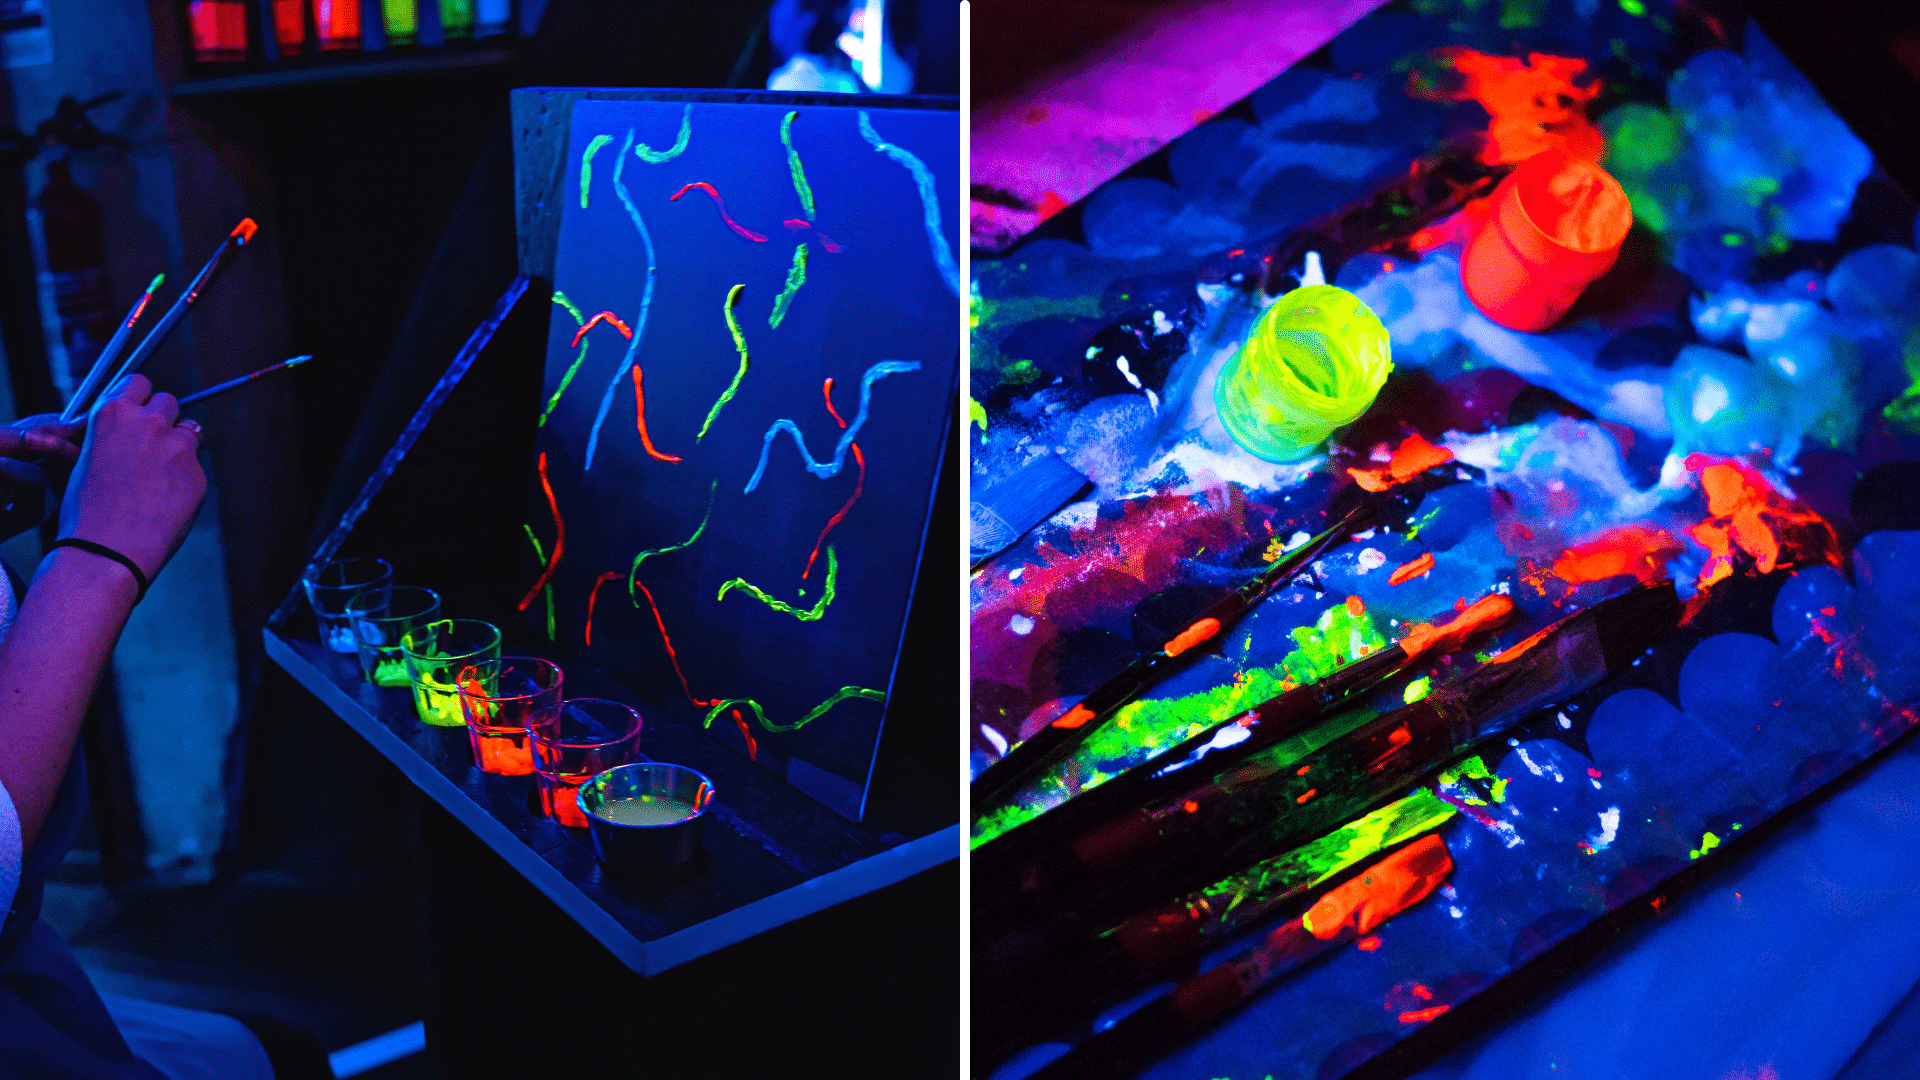 Two images of paints and canvases being used for Paint in the Dark.